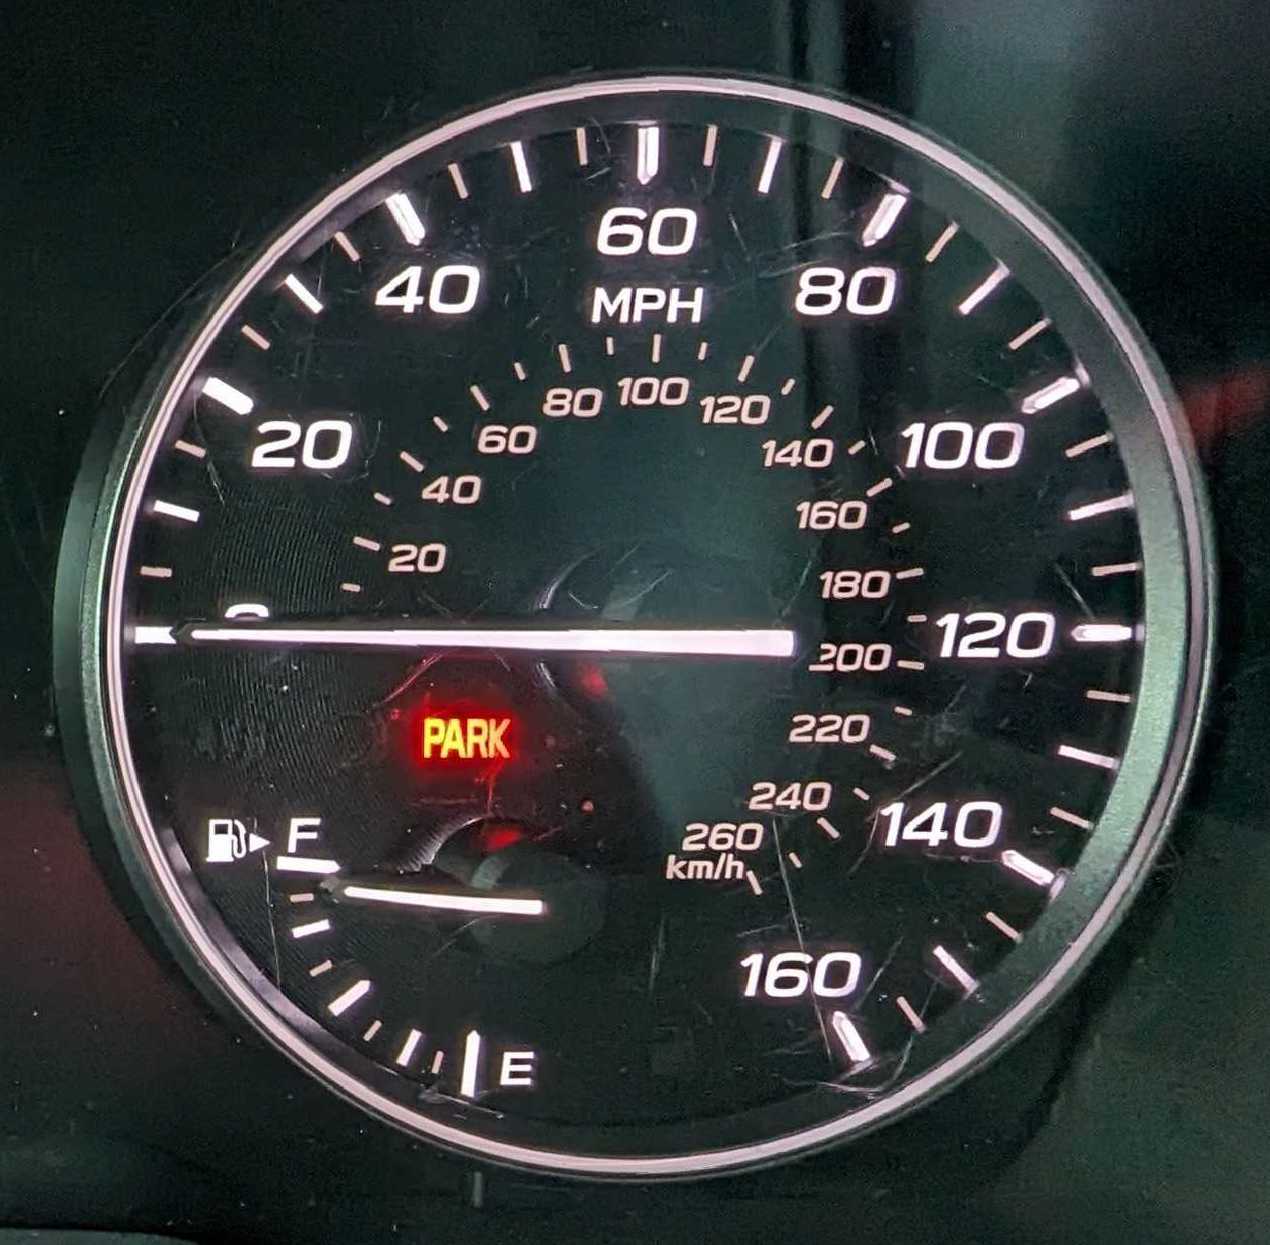 A car's speedometer, showing a full tank of gas.